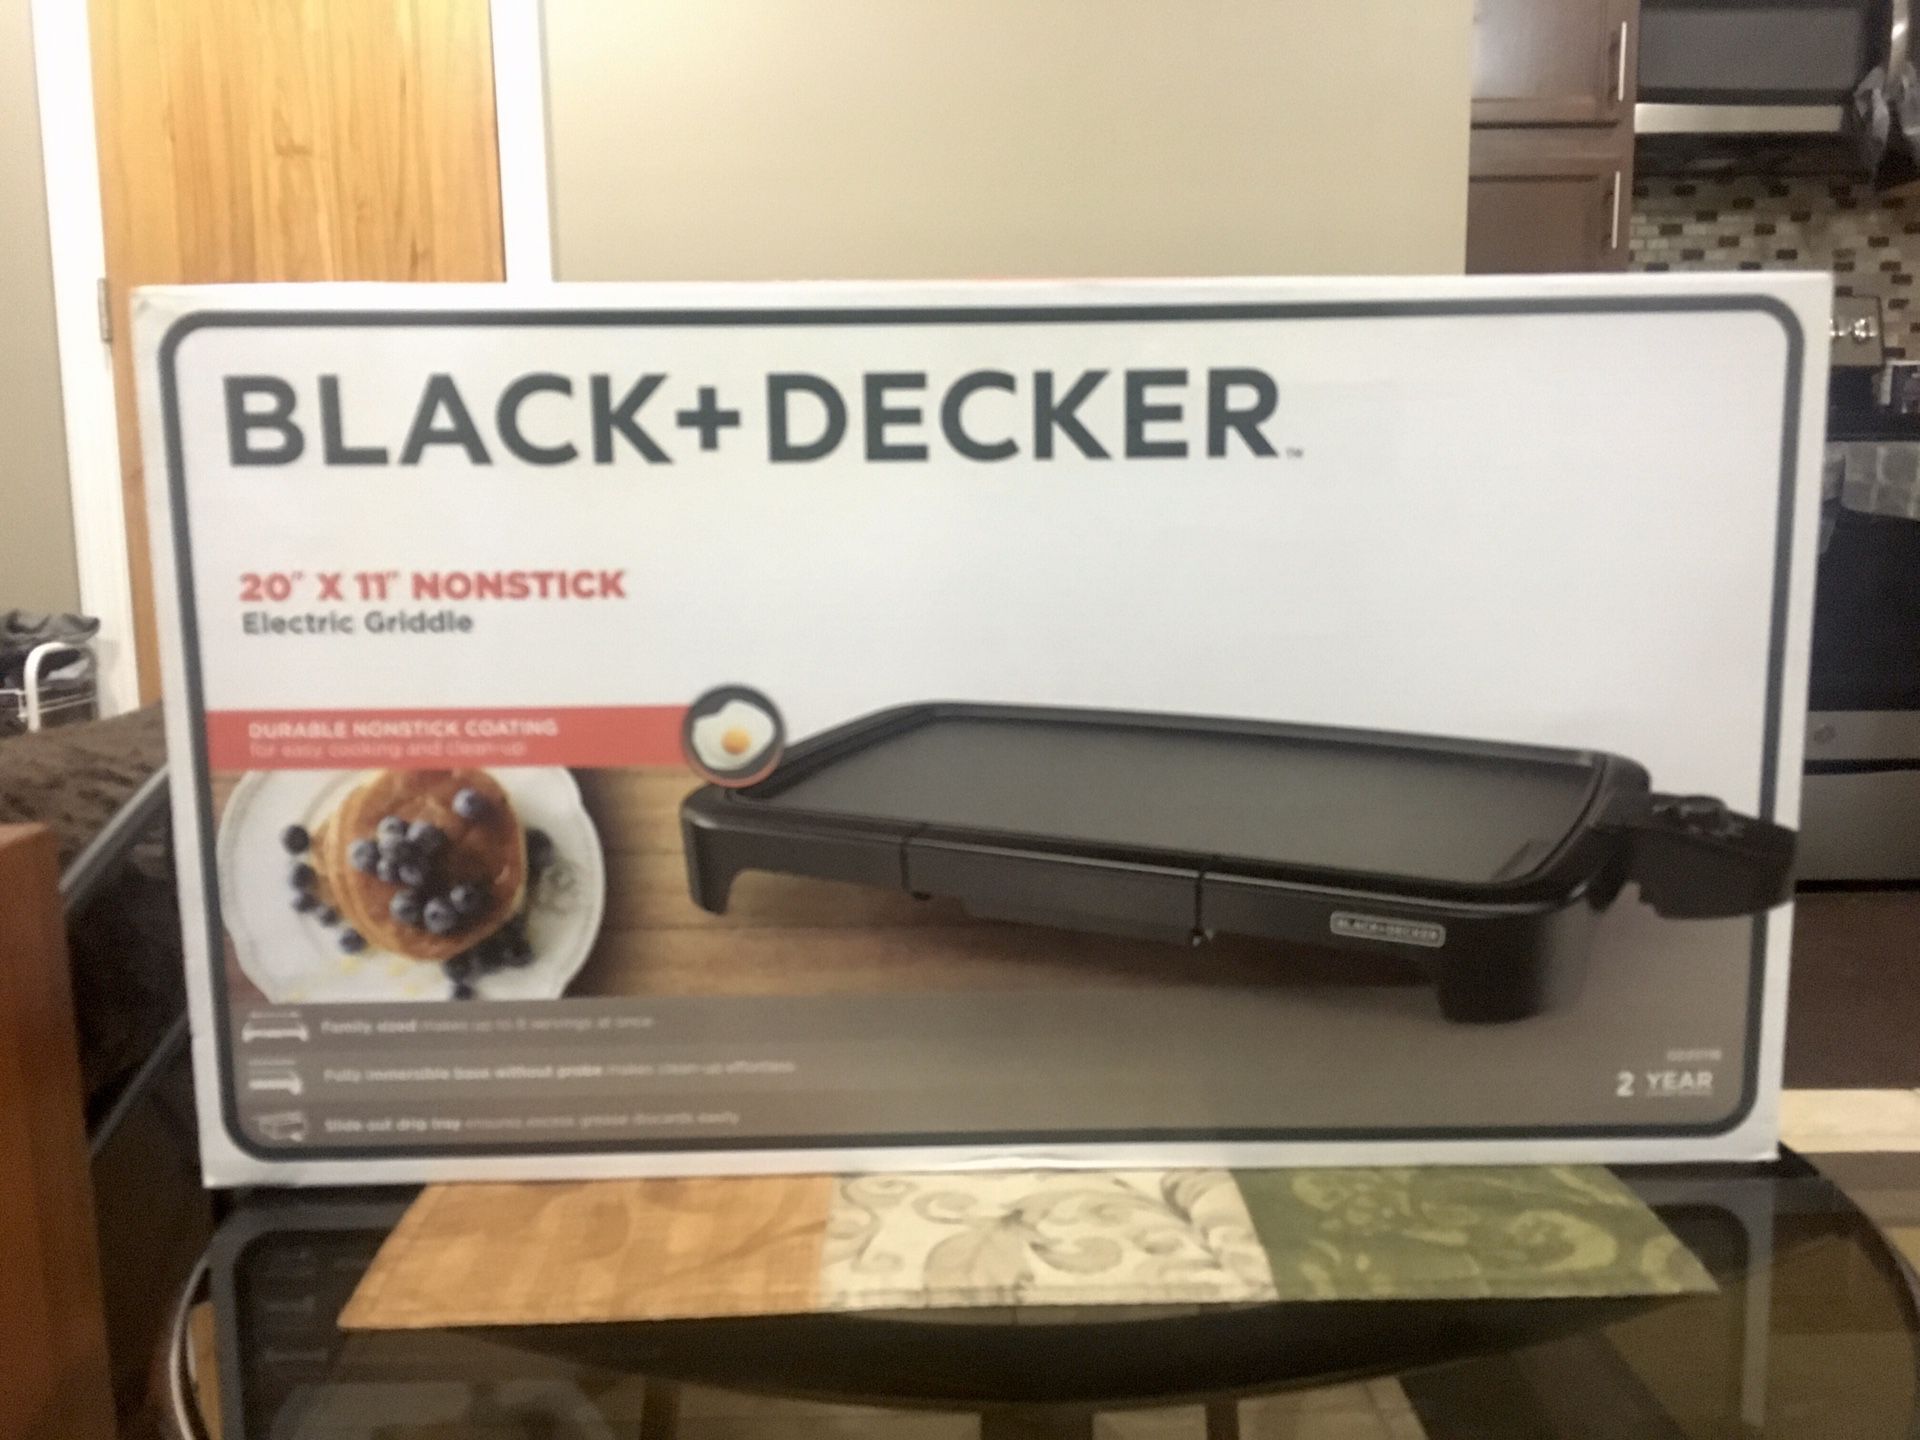 Black Decker Electric Griddle for making Pan Cakes etc